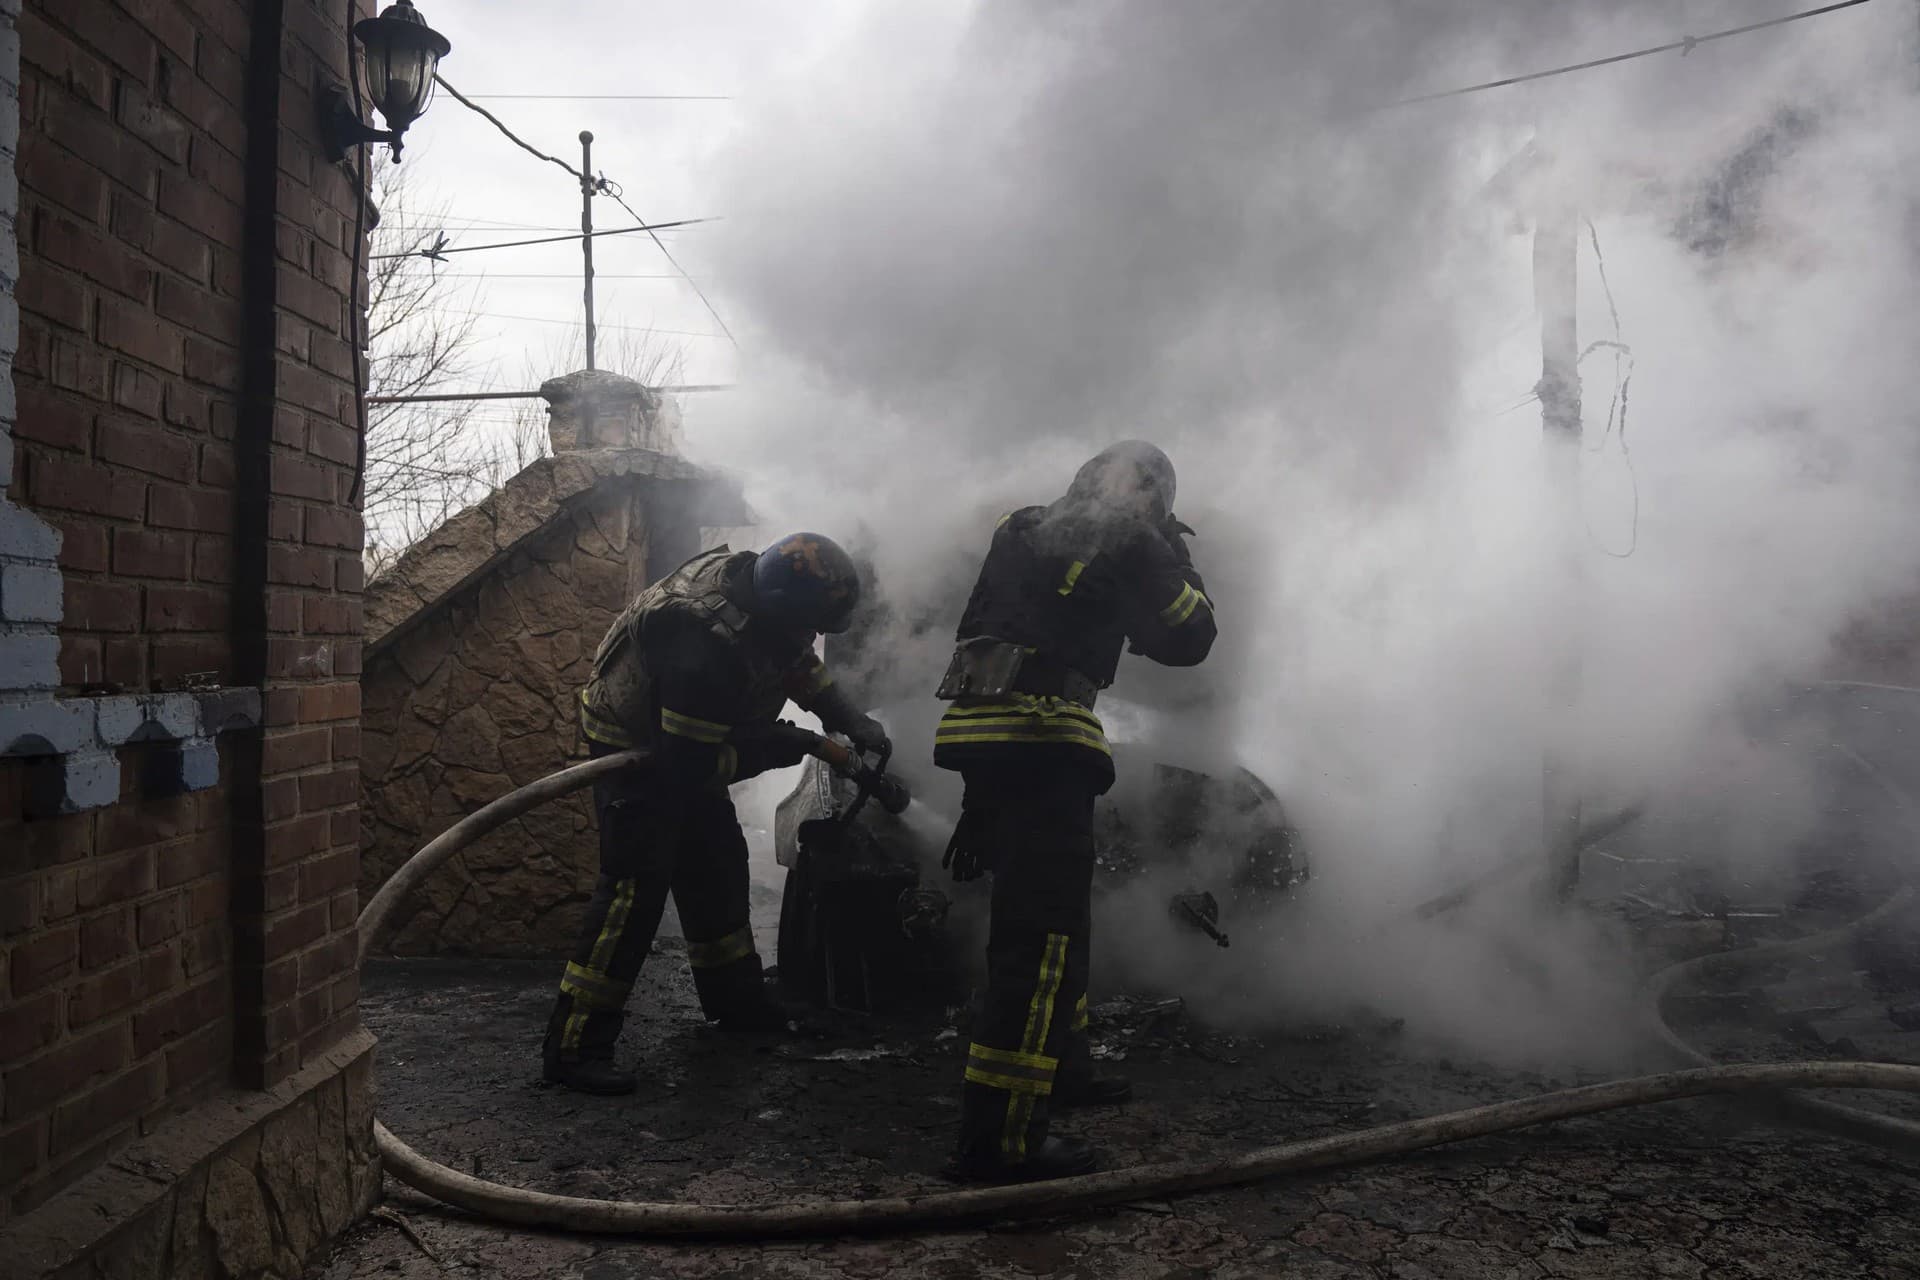 Rescue workers put out the fire of a car which was shelled by Russian forces at the residential neighbourhood in Kostiantynivka